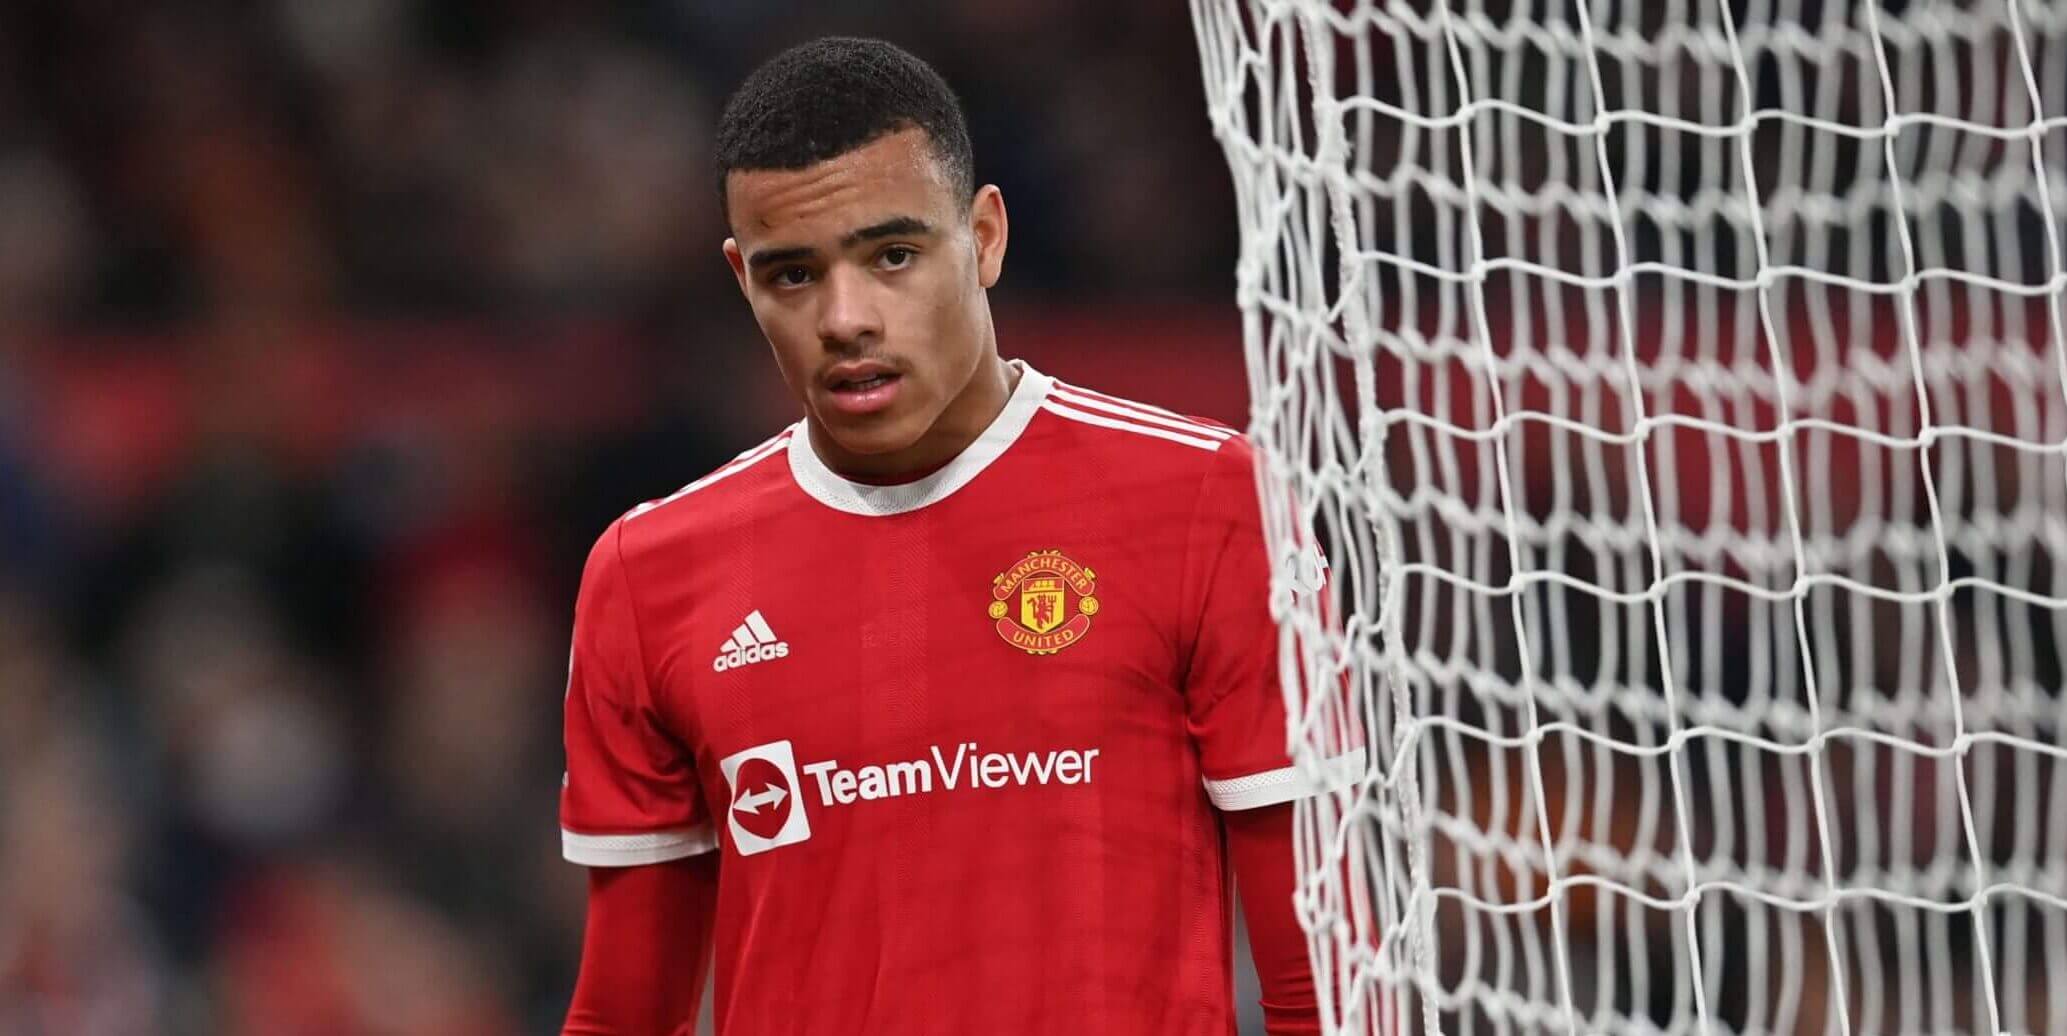 Mason Greenwood, who is said to be leaving Manchester United